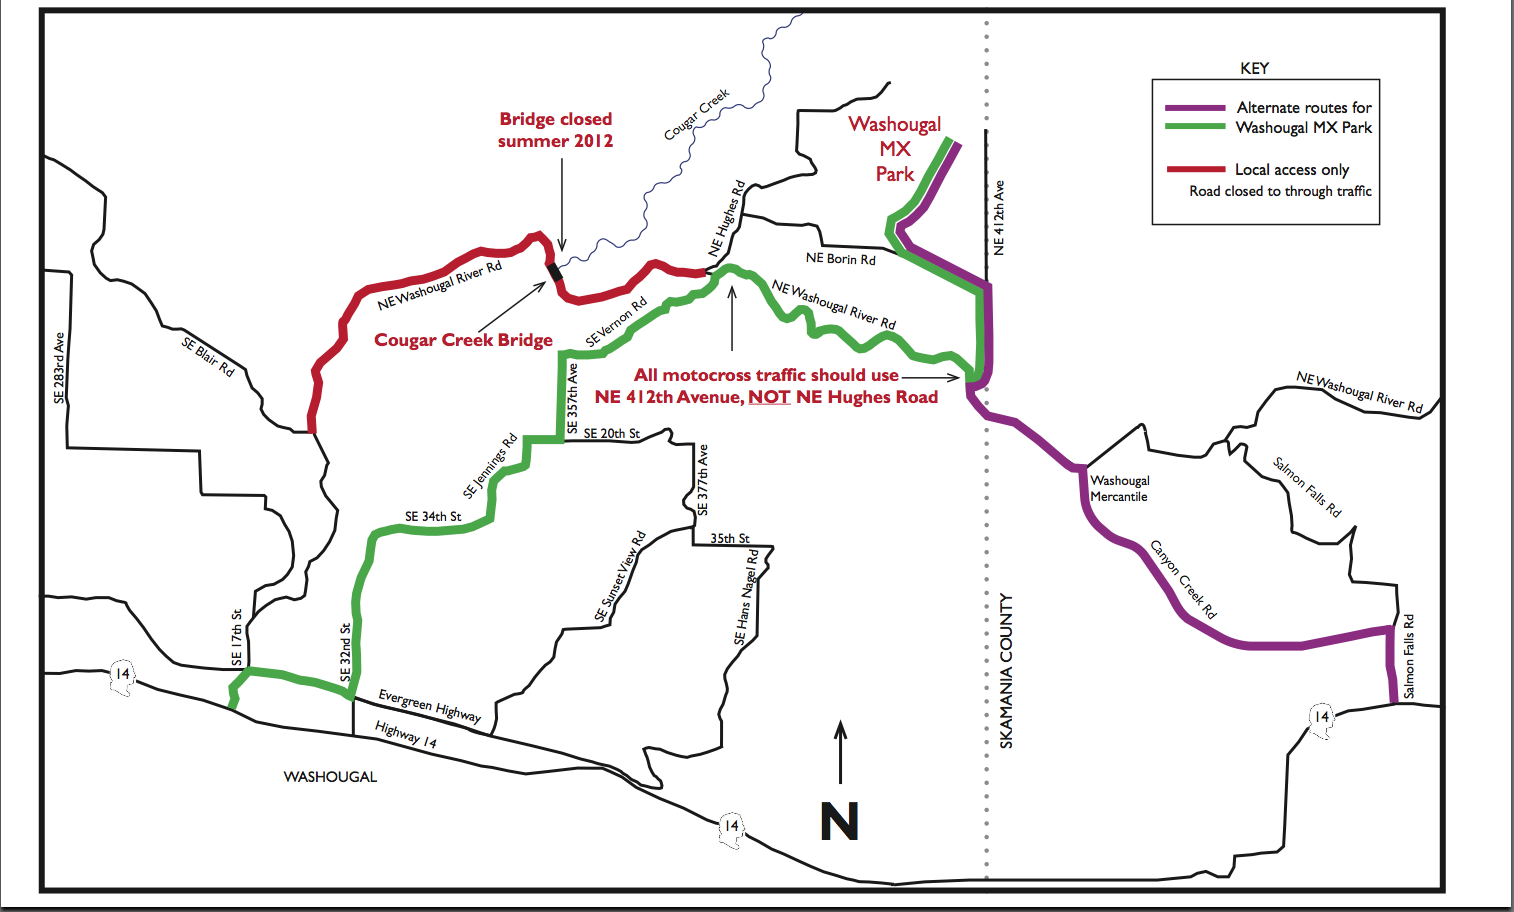 Alternate routes to the Washougal MX Park while the Cougar Creek Bridge is replaced this summer.